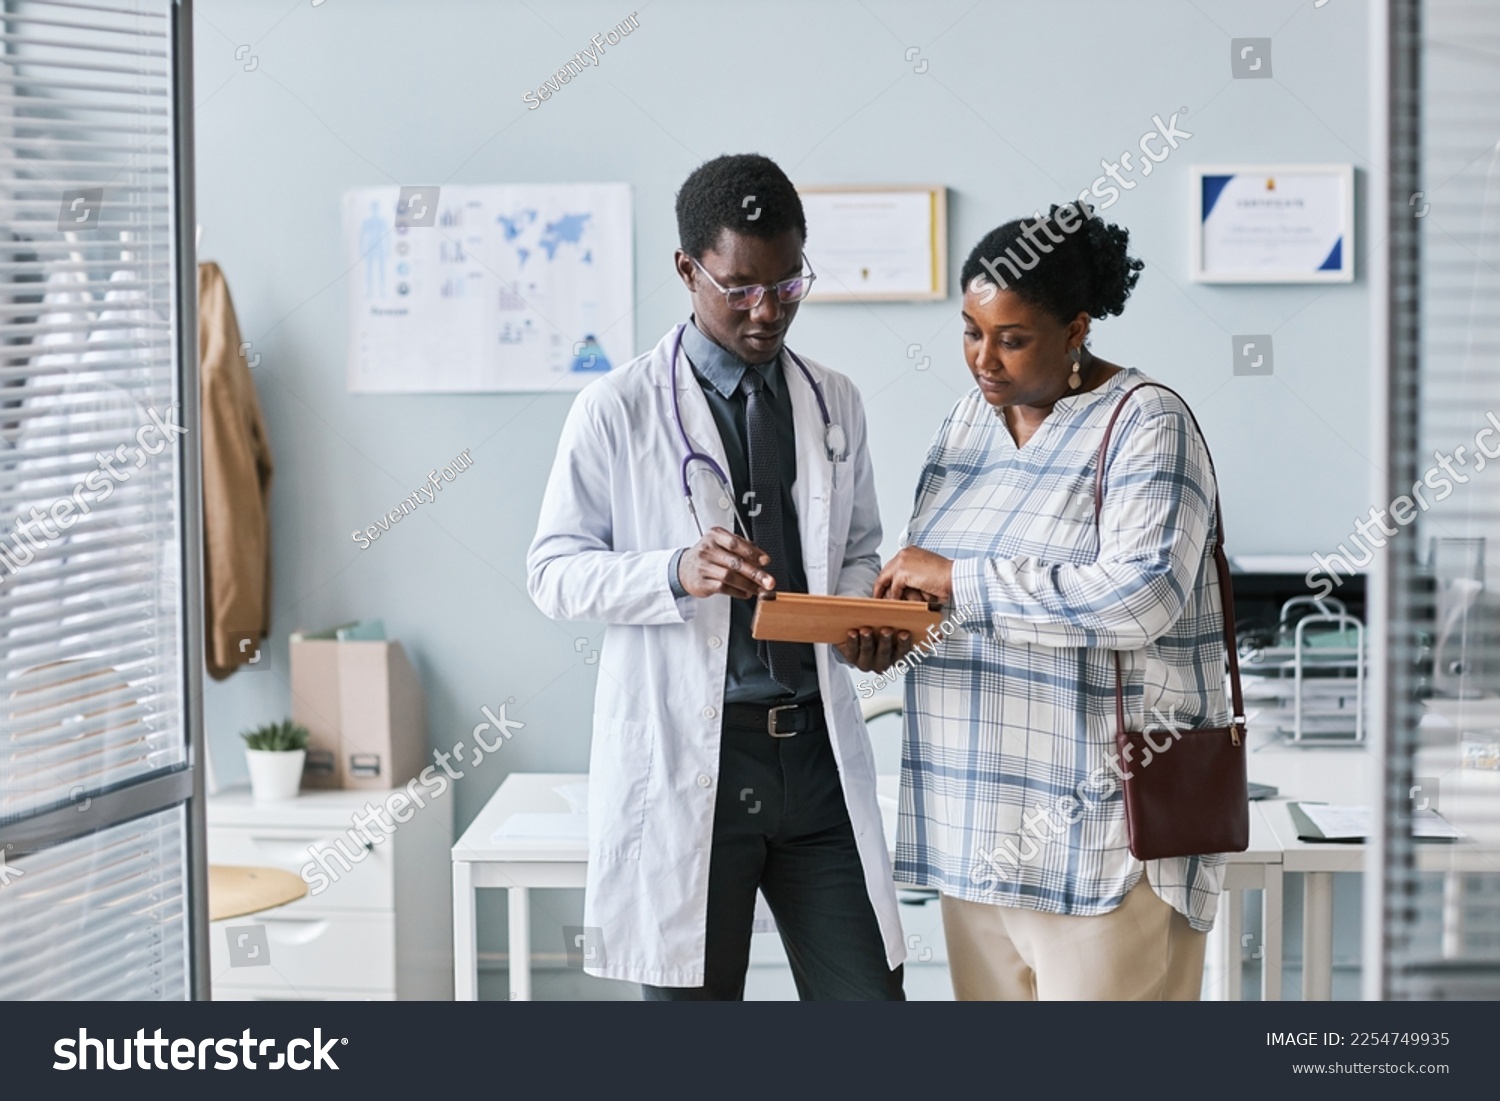 Waist up portrait of young African American doctor consulting female patient using digital tablet in clinic setting #2254749935